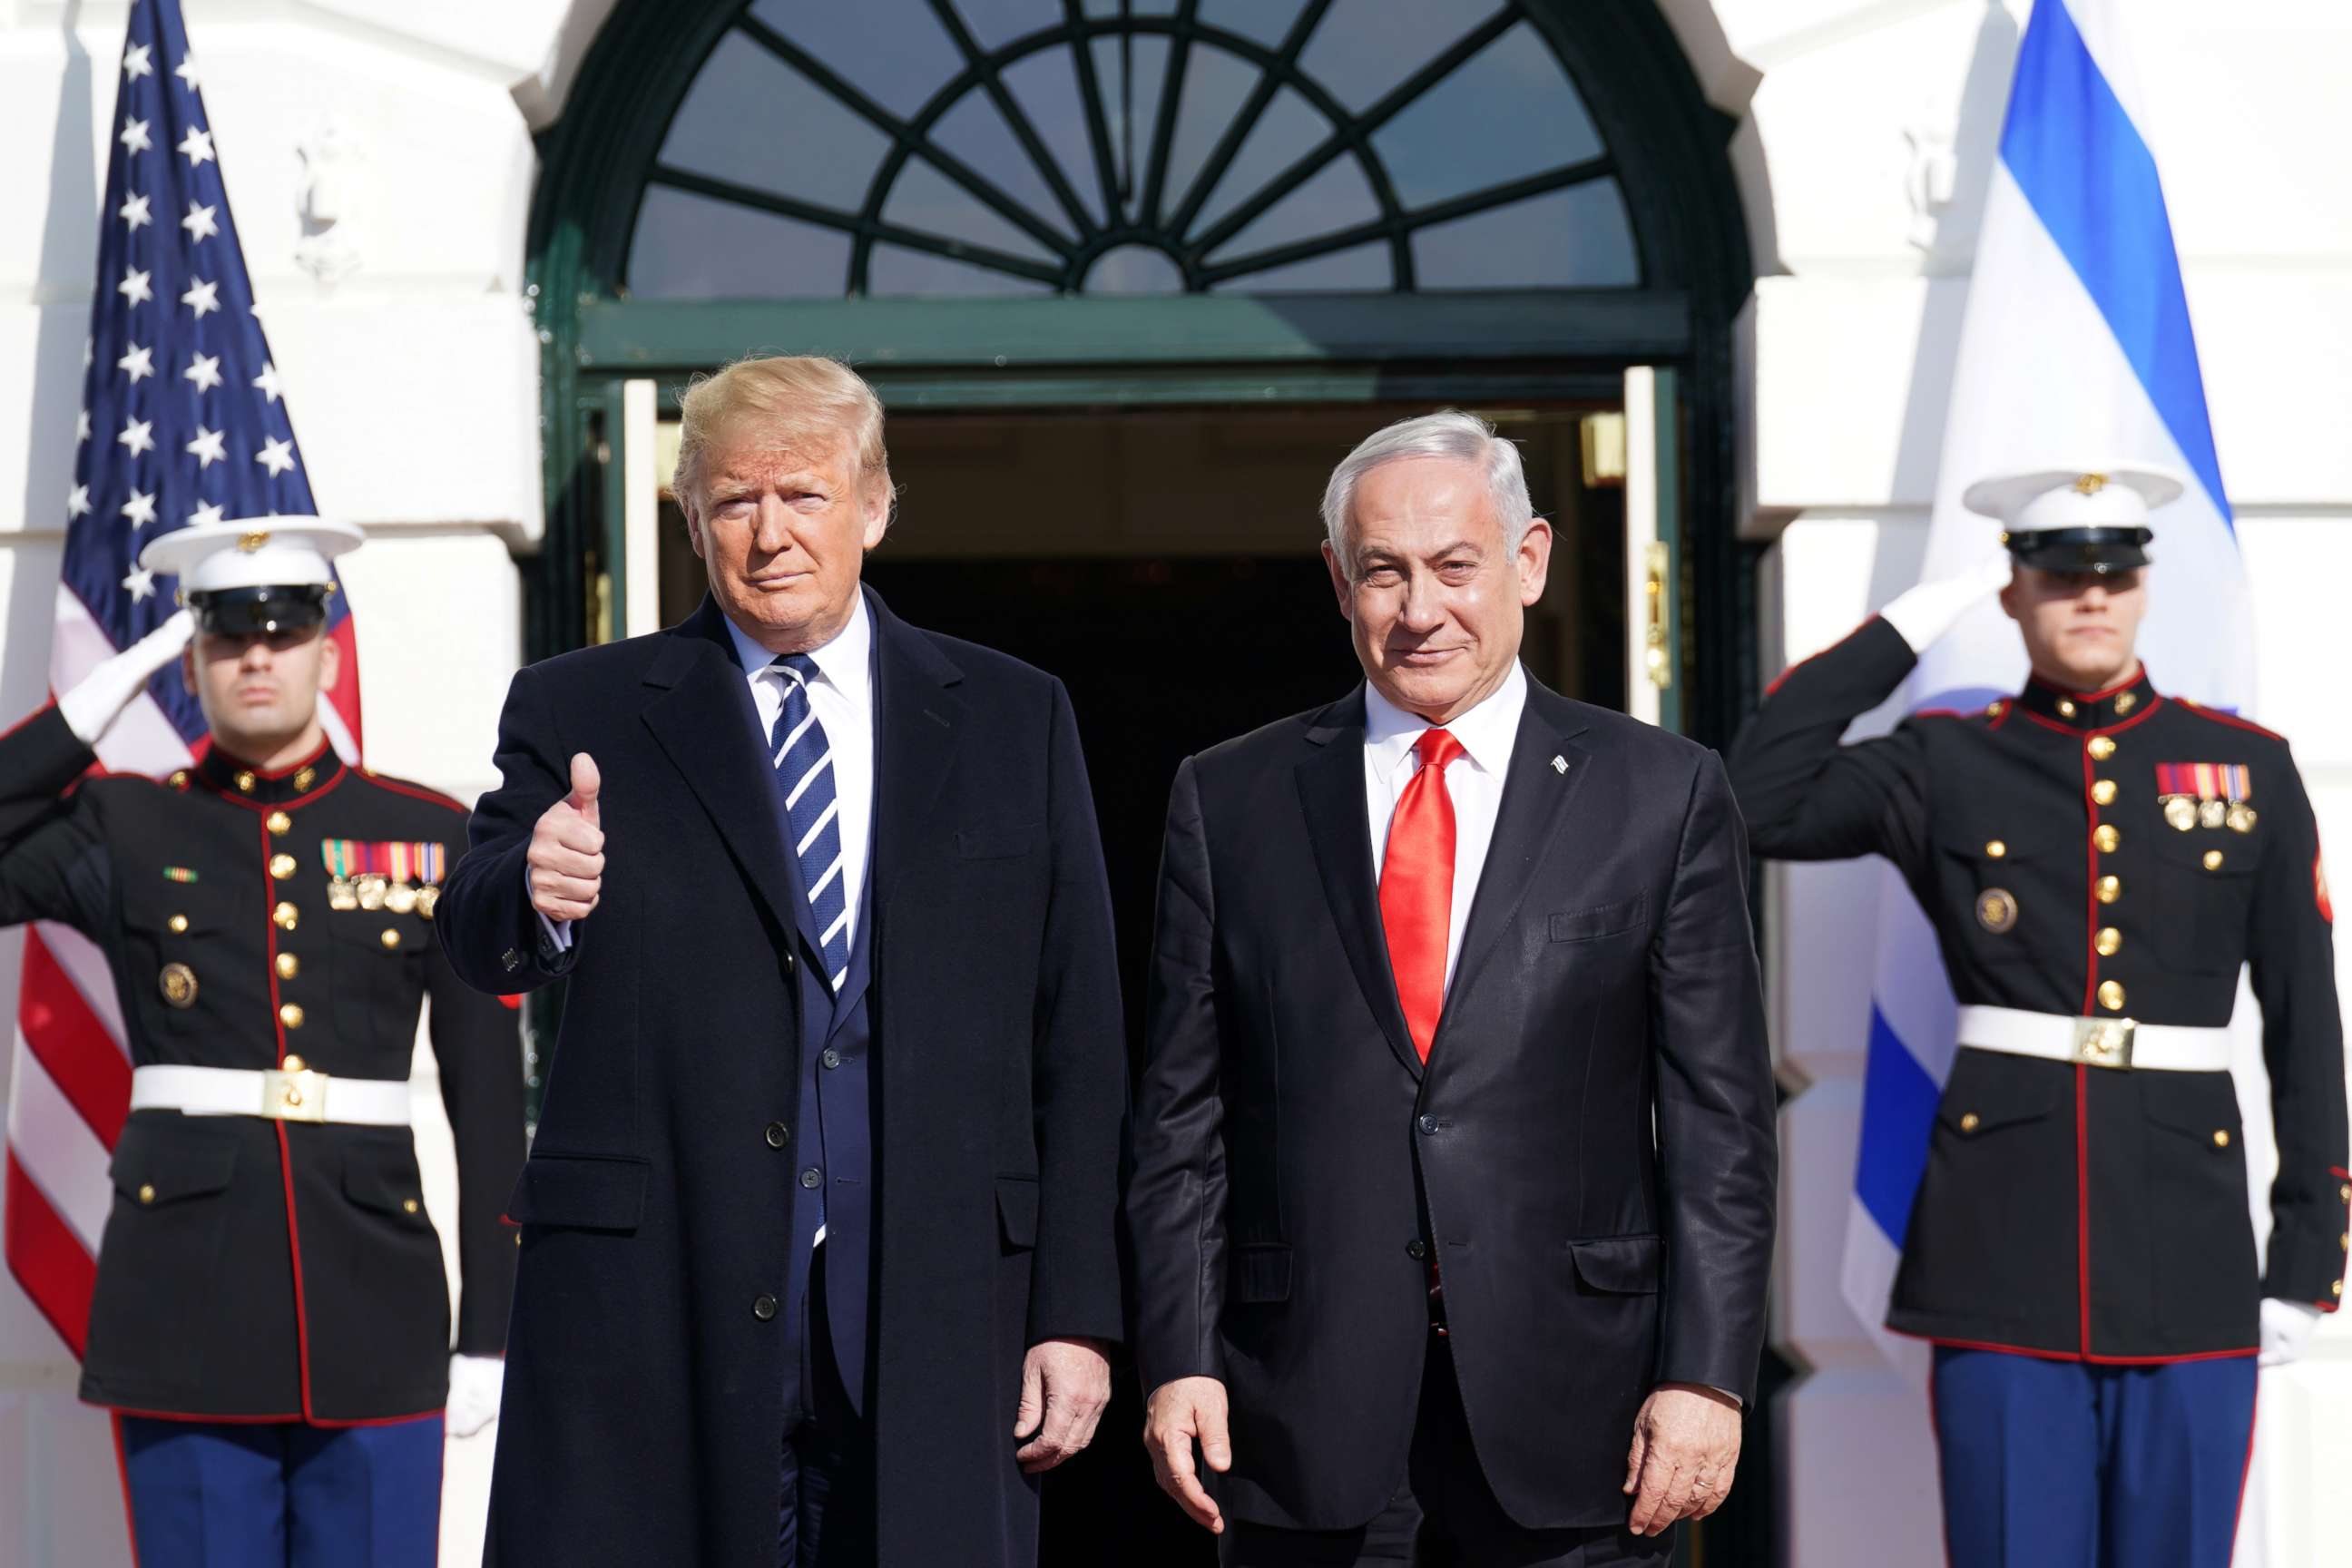 PHOTO: President Donald Trump gestures as he welcomes Israel's Prime Minister Benjamin Netanyahu at the White House, Jan. 27, 2020.